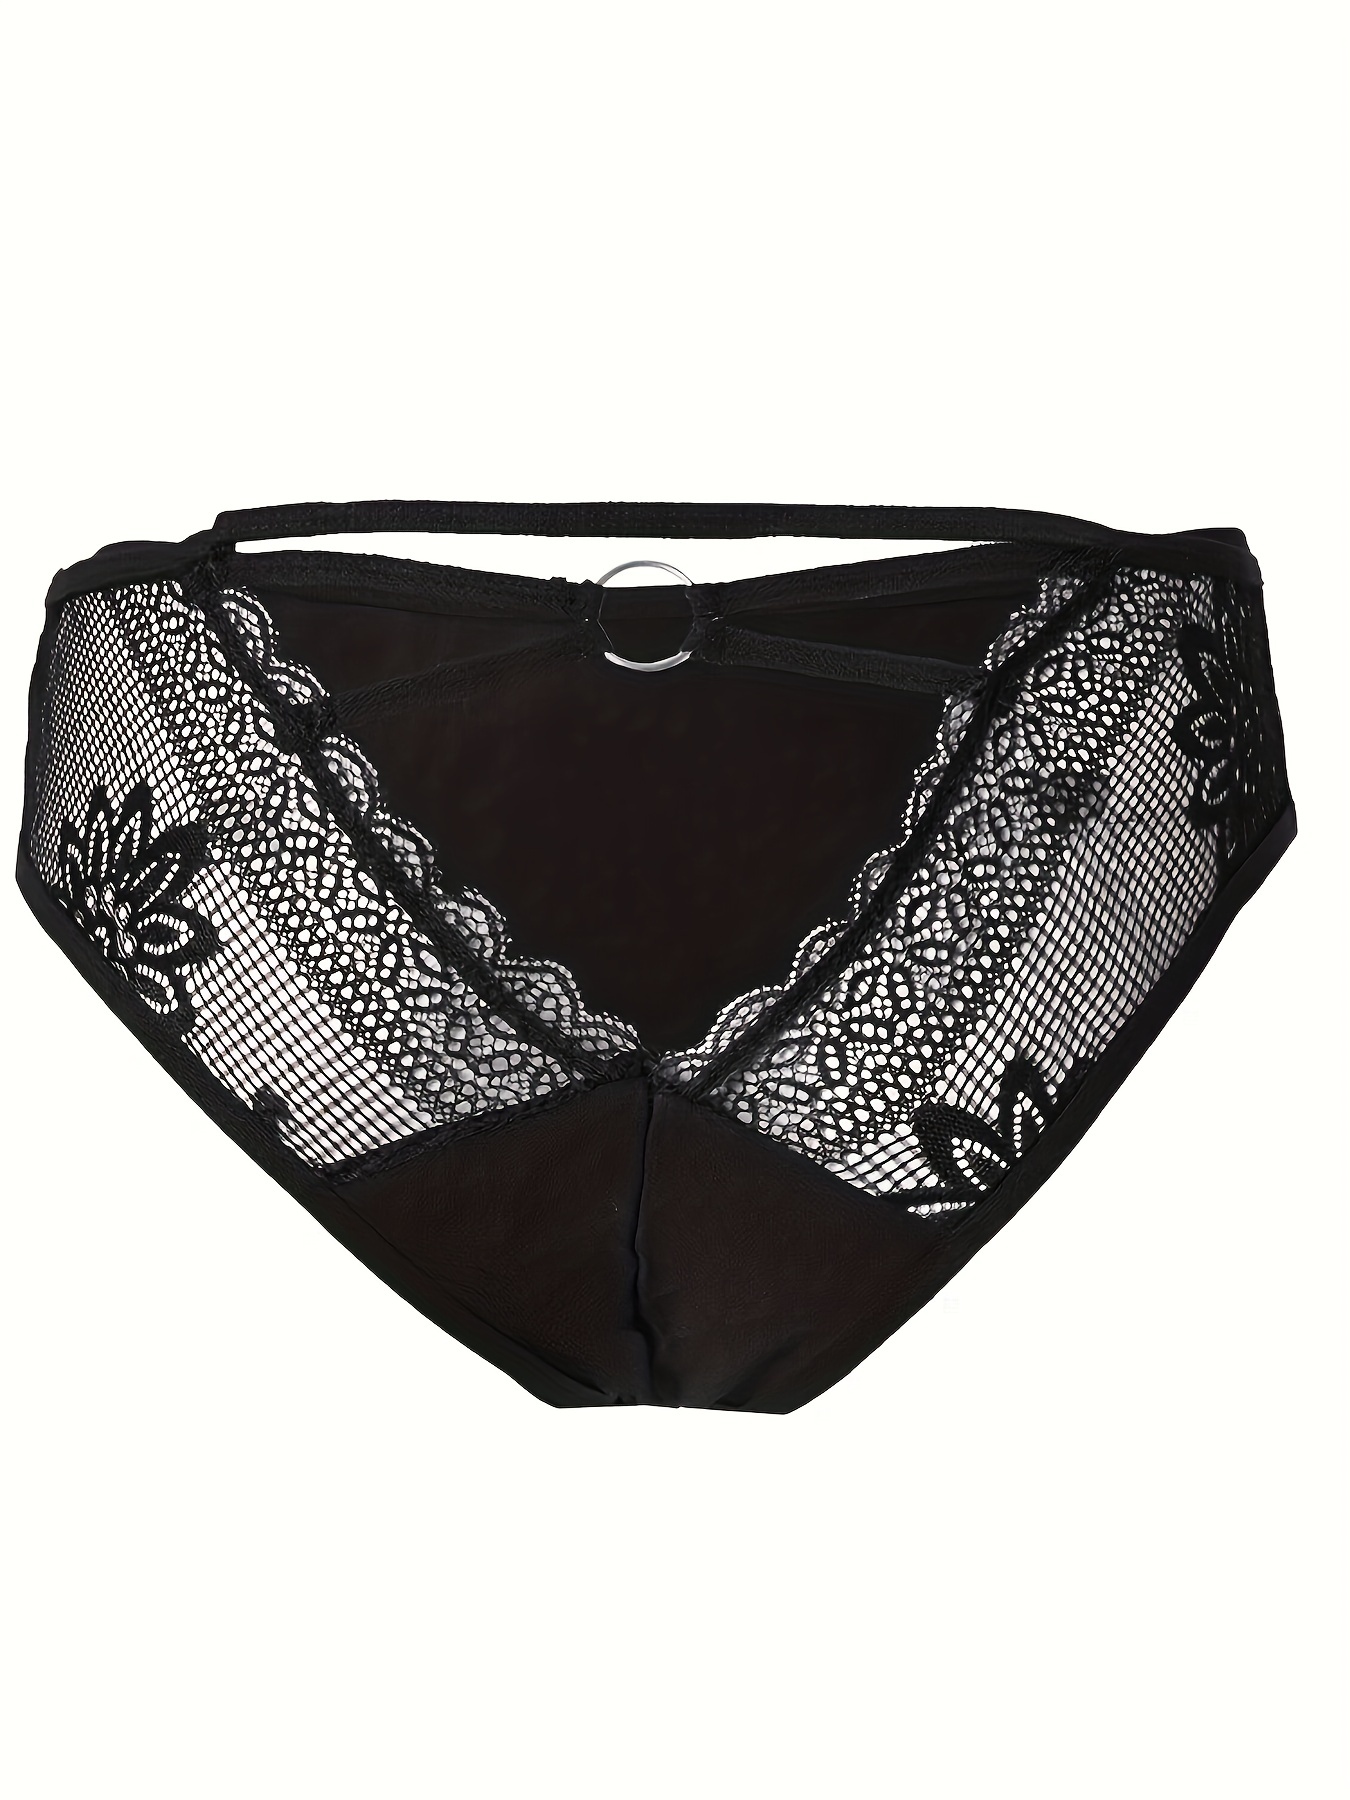 Plus Size Sexy Brief, Women's Plus Solid Contrast Lace Ring Linked Sheer  Underwear